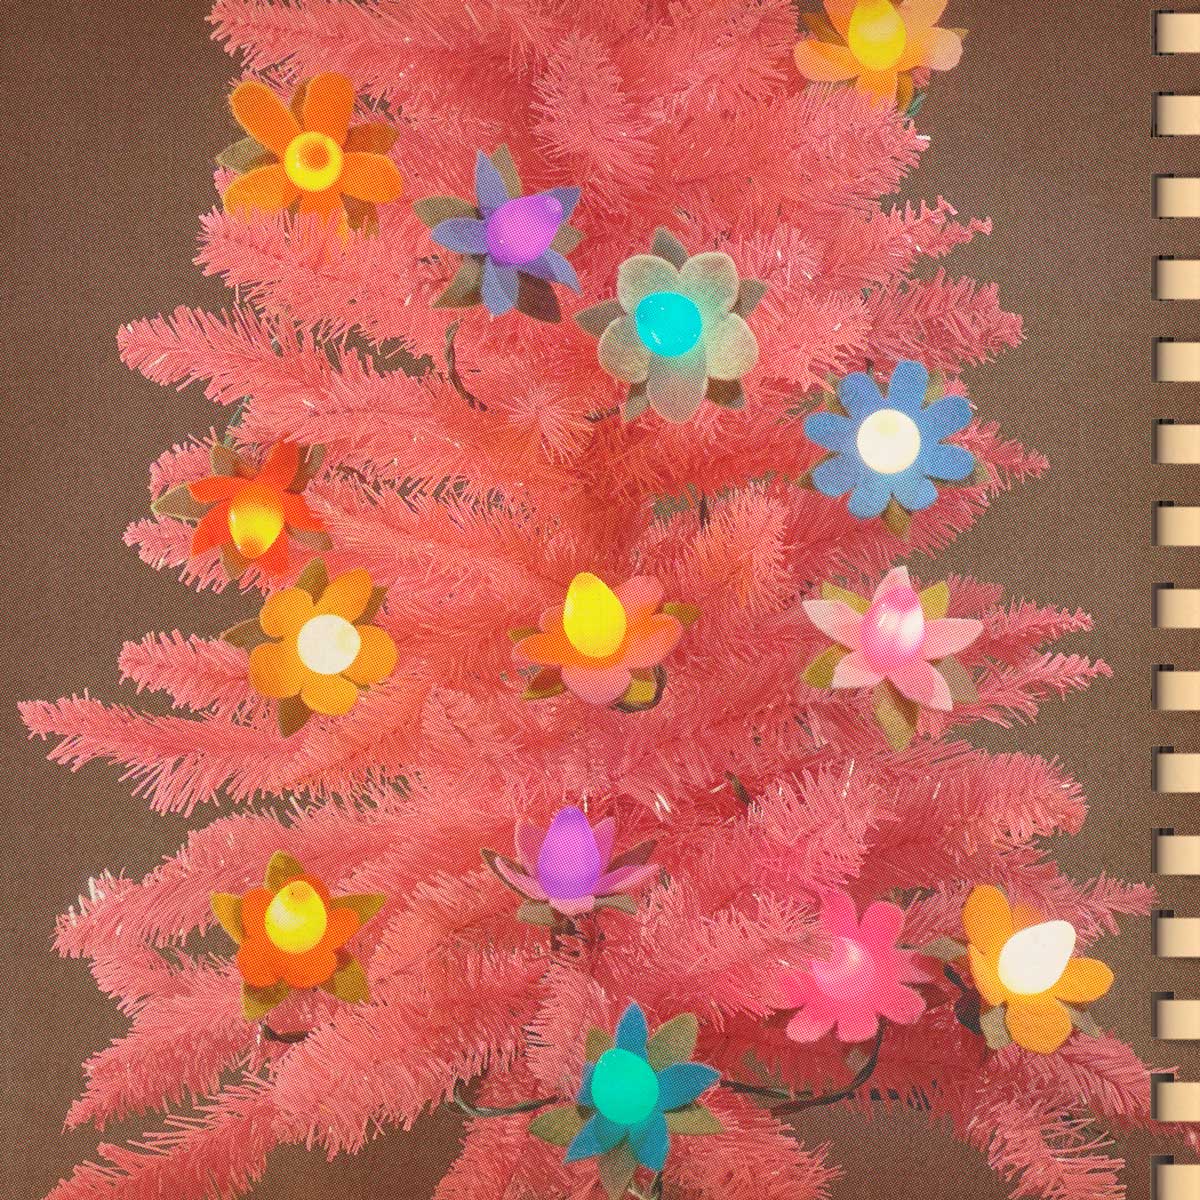 Pink Christmas tree with vintage style lights and felt flower accessories